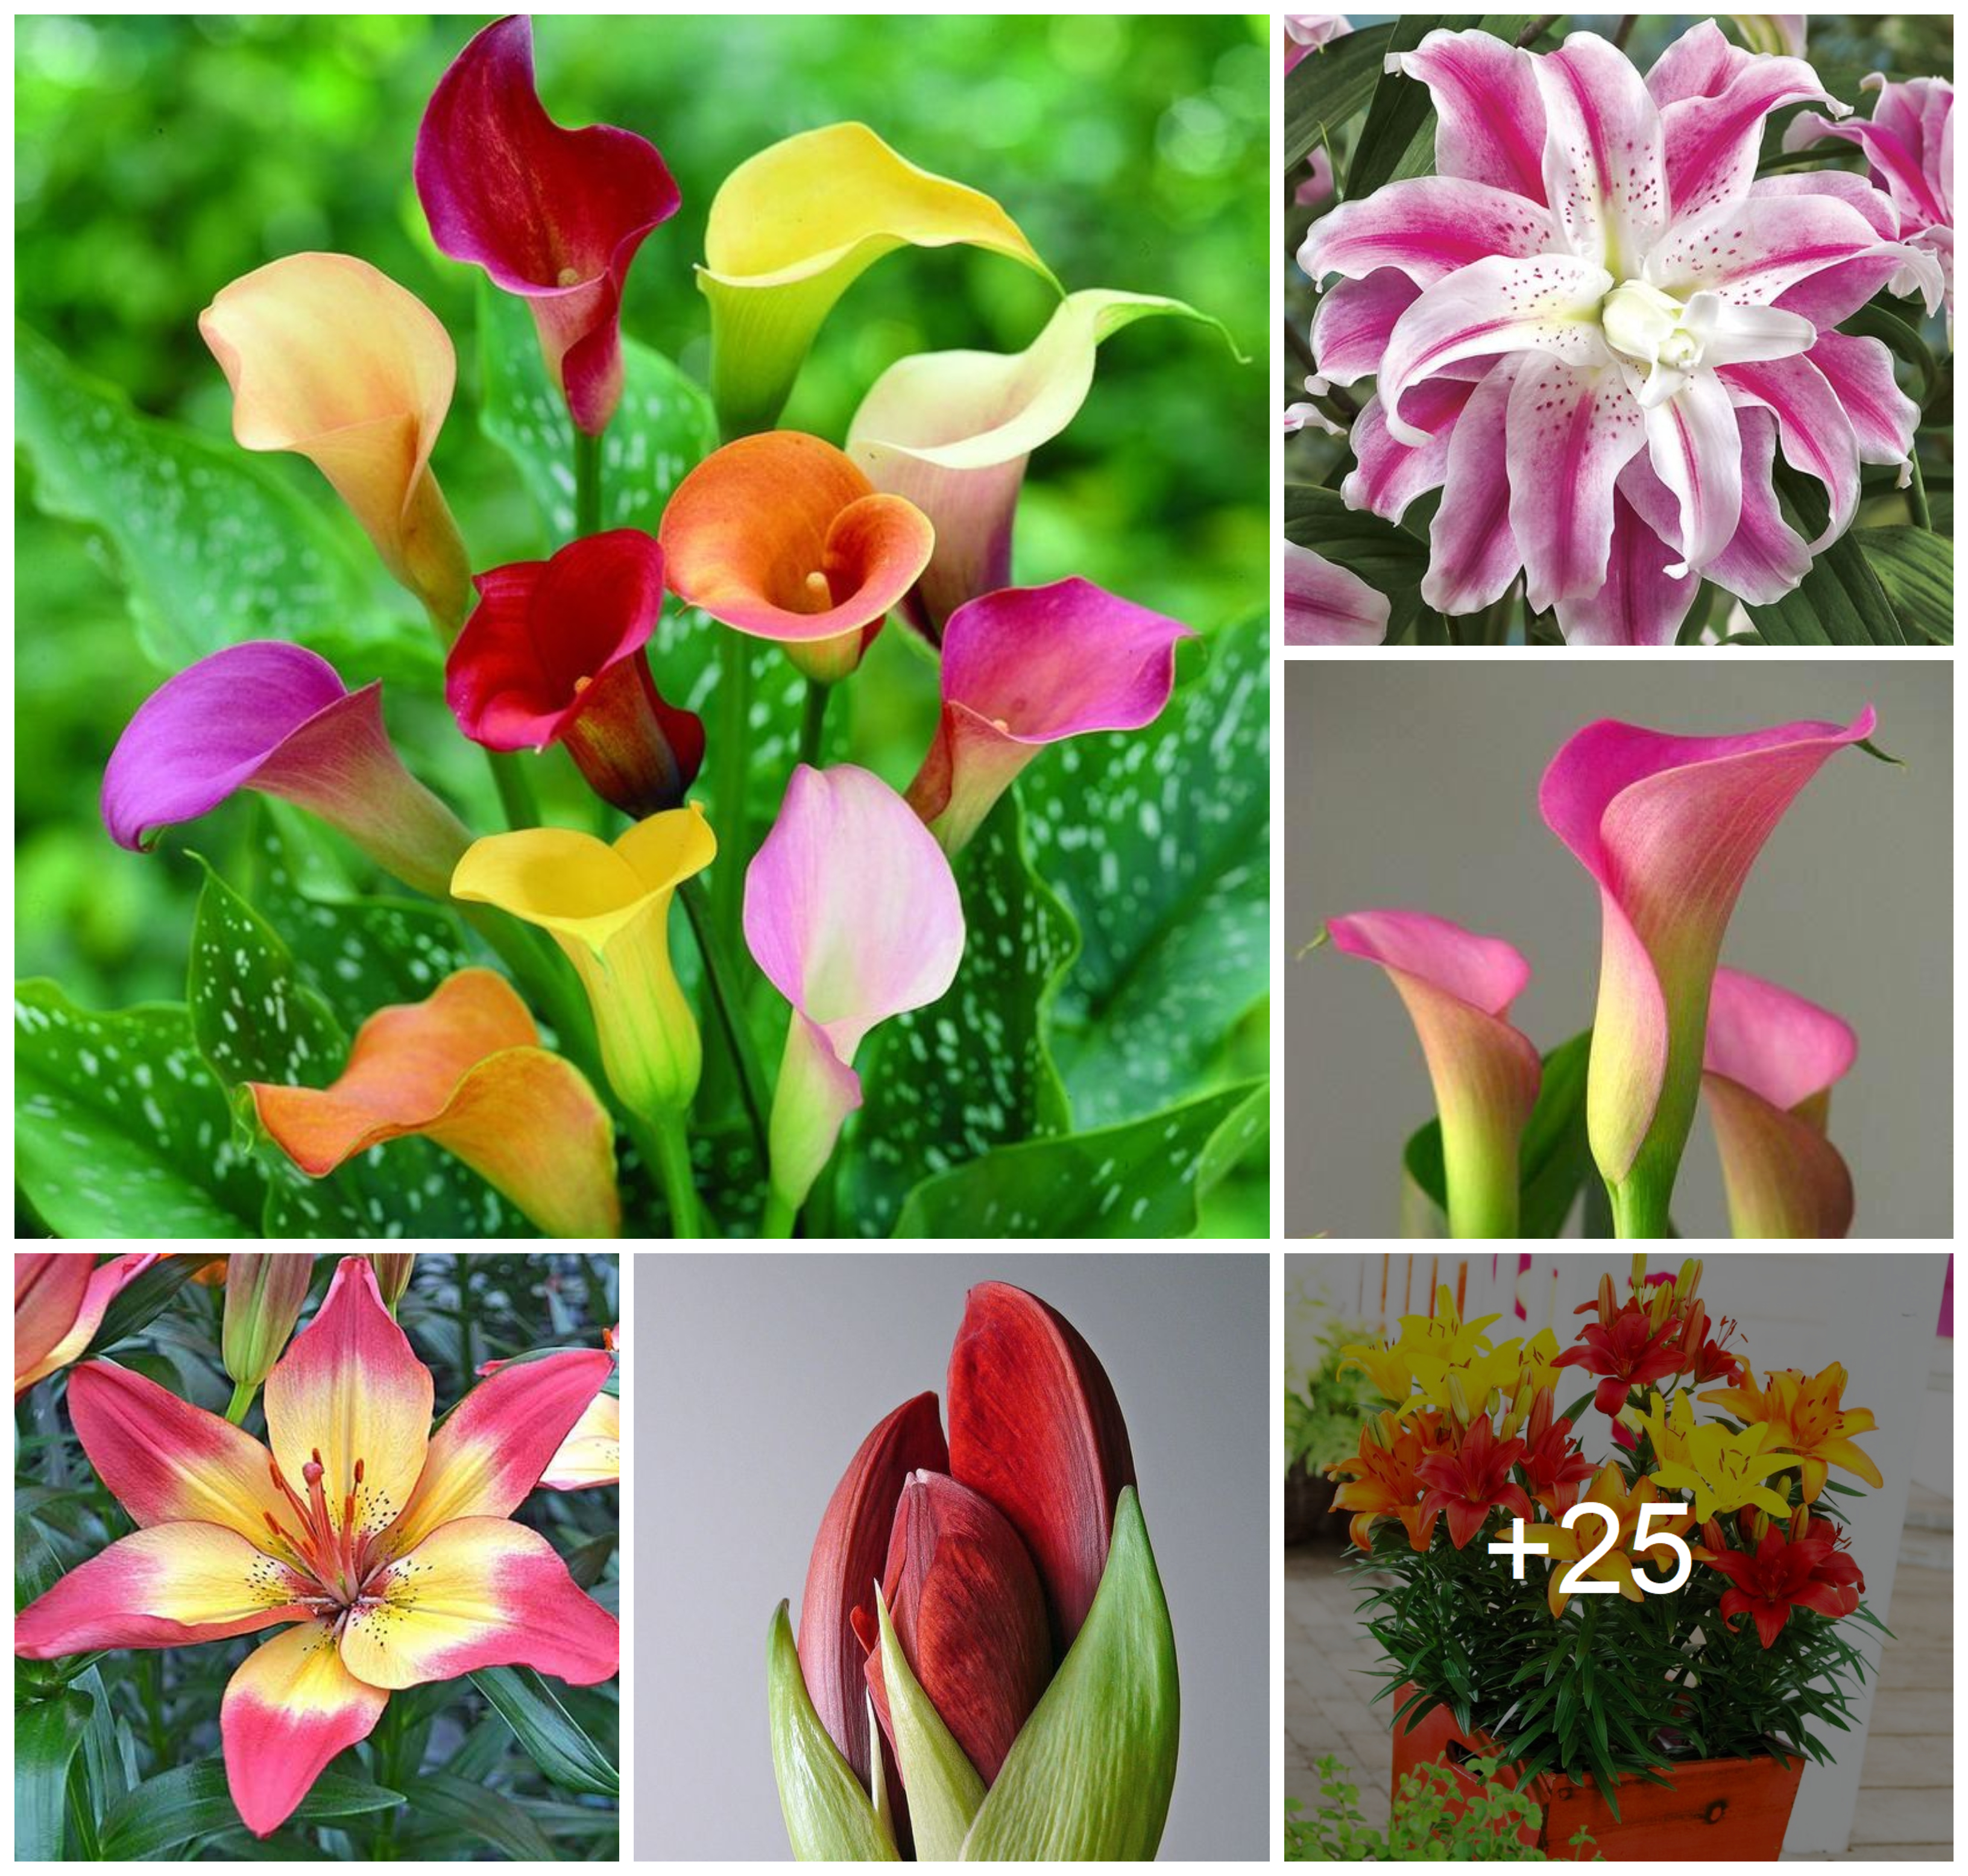 How to grow Calla Lily and Liles from bulbils